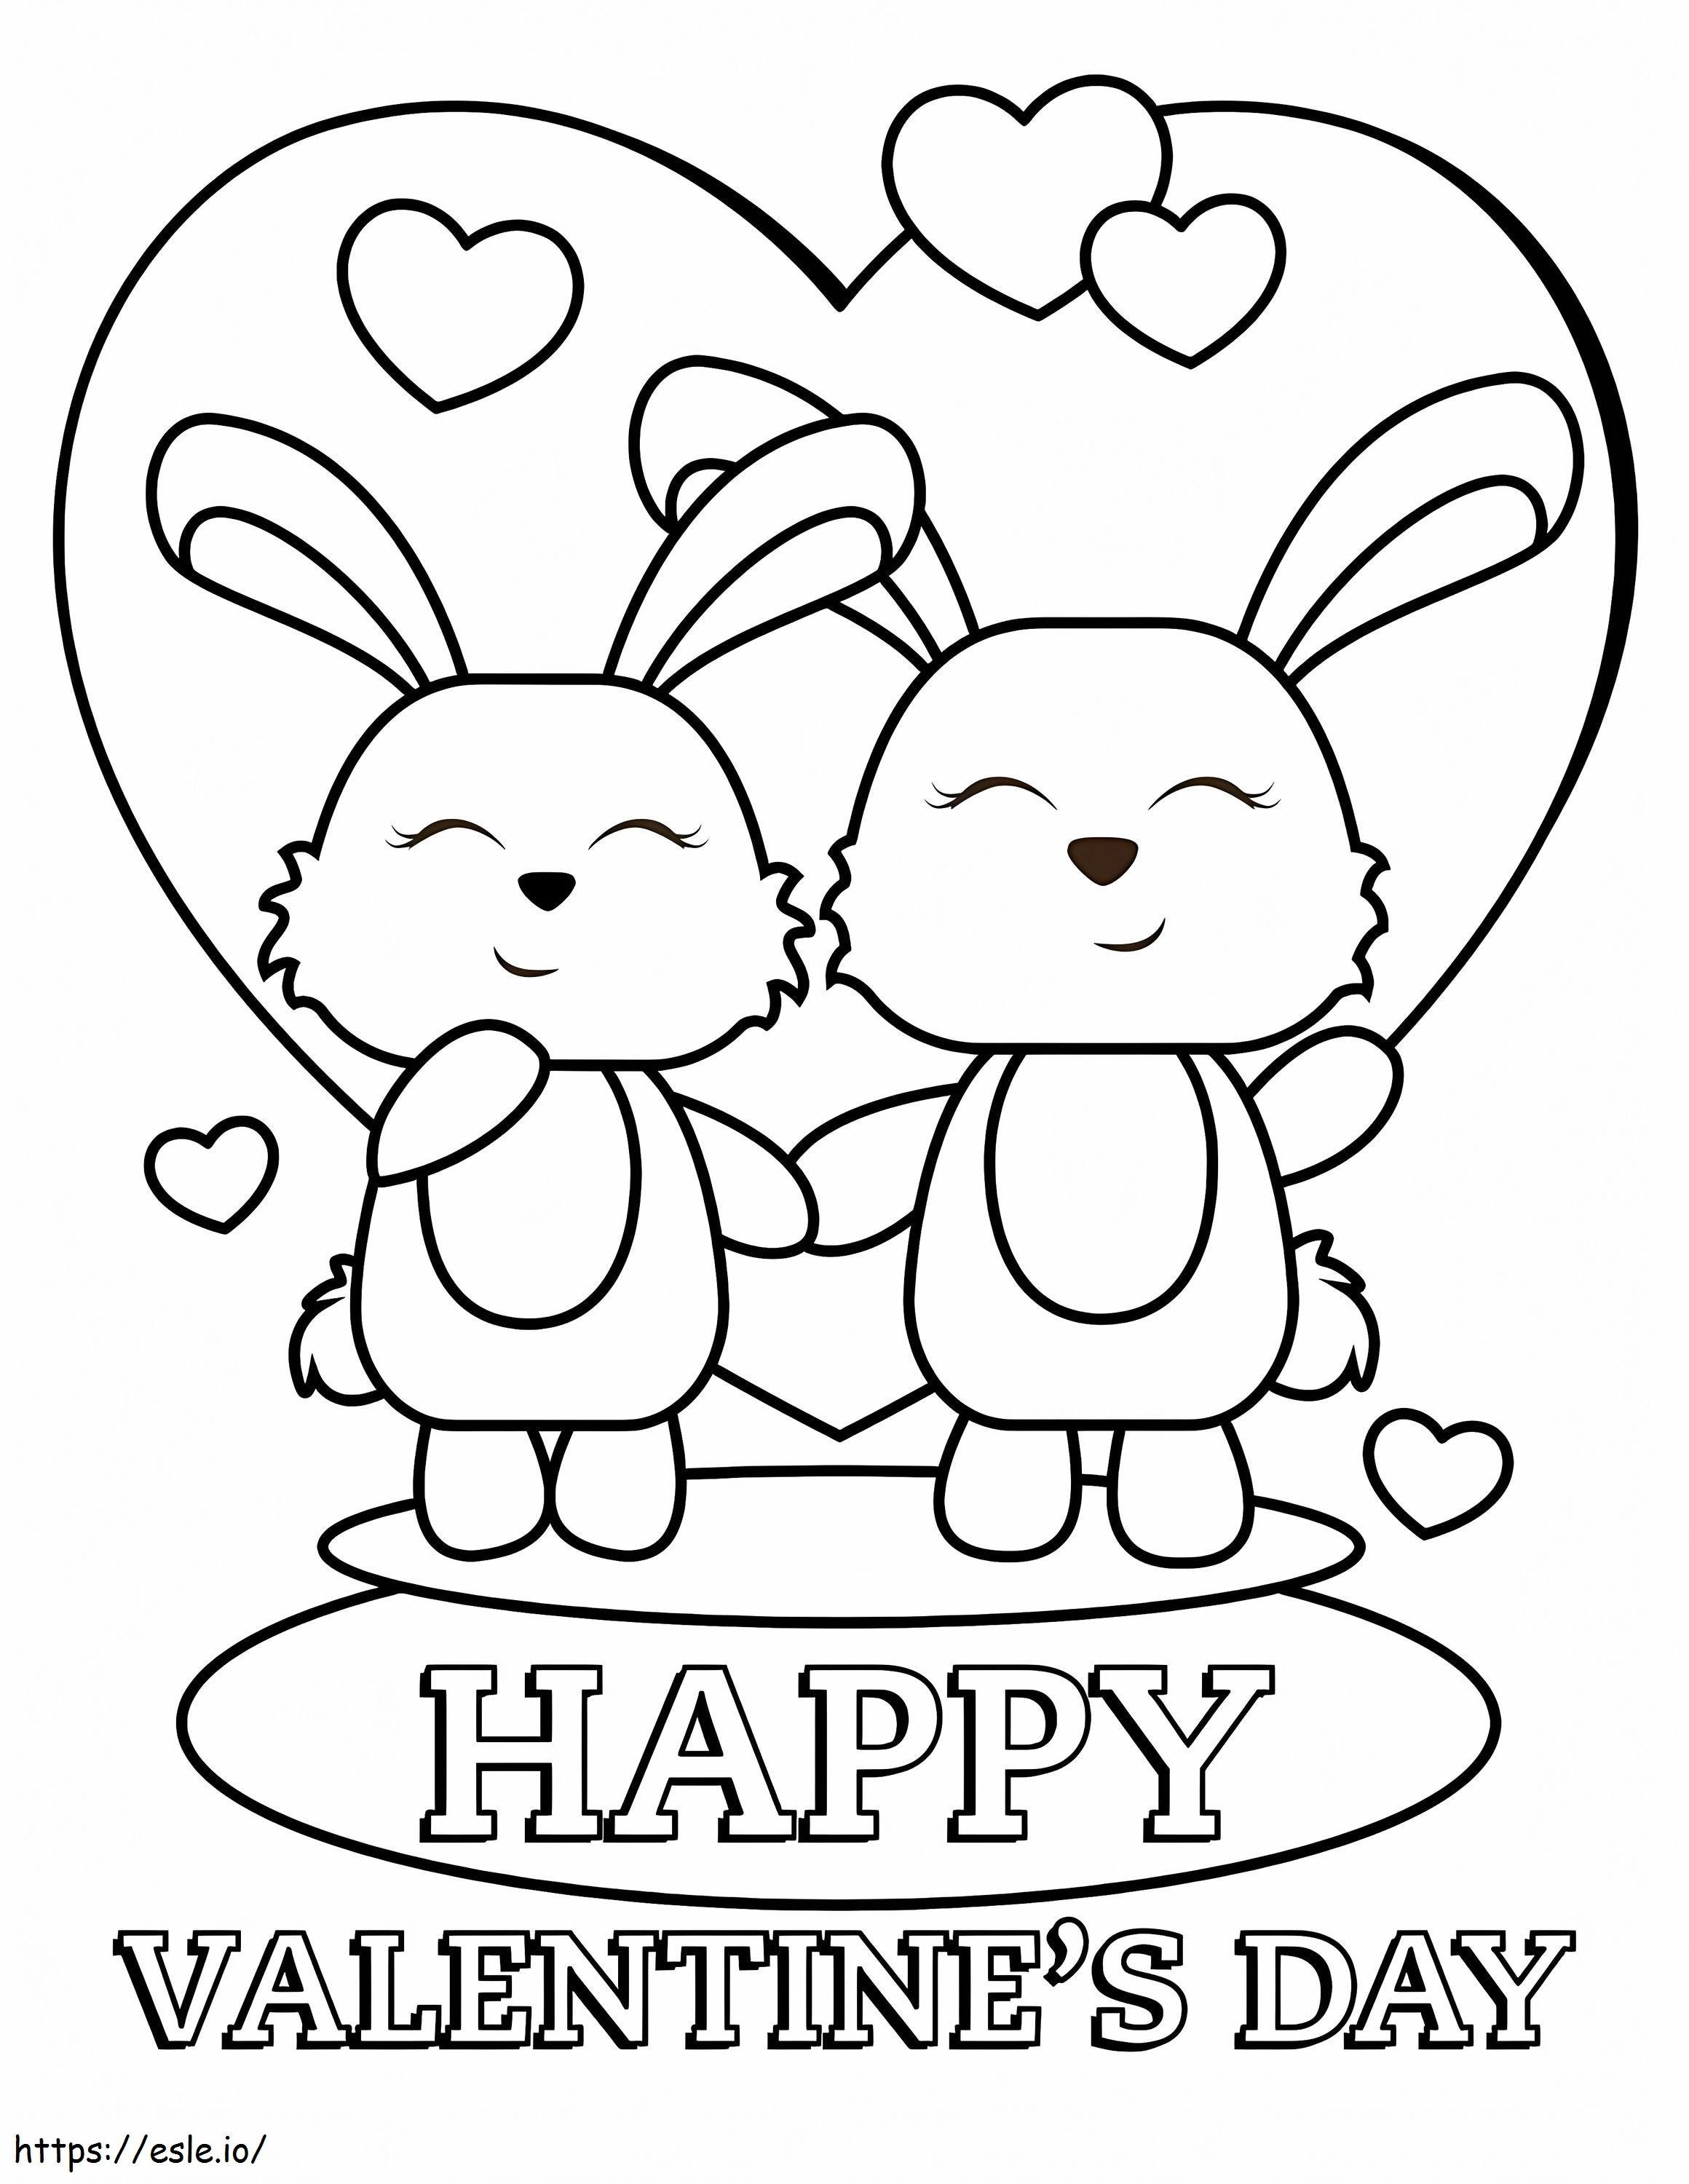 1578882685 Valentineday Coloring 2 coloring page